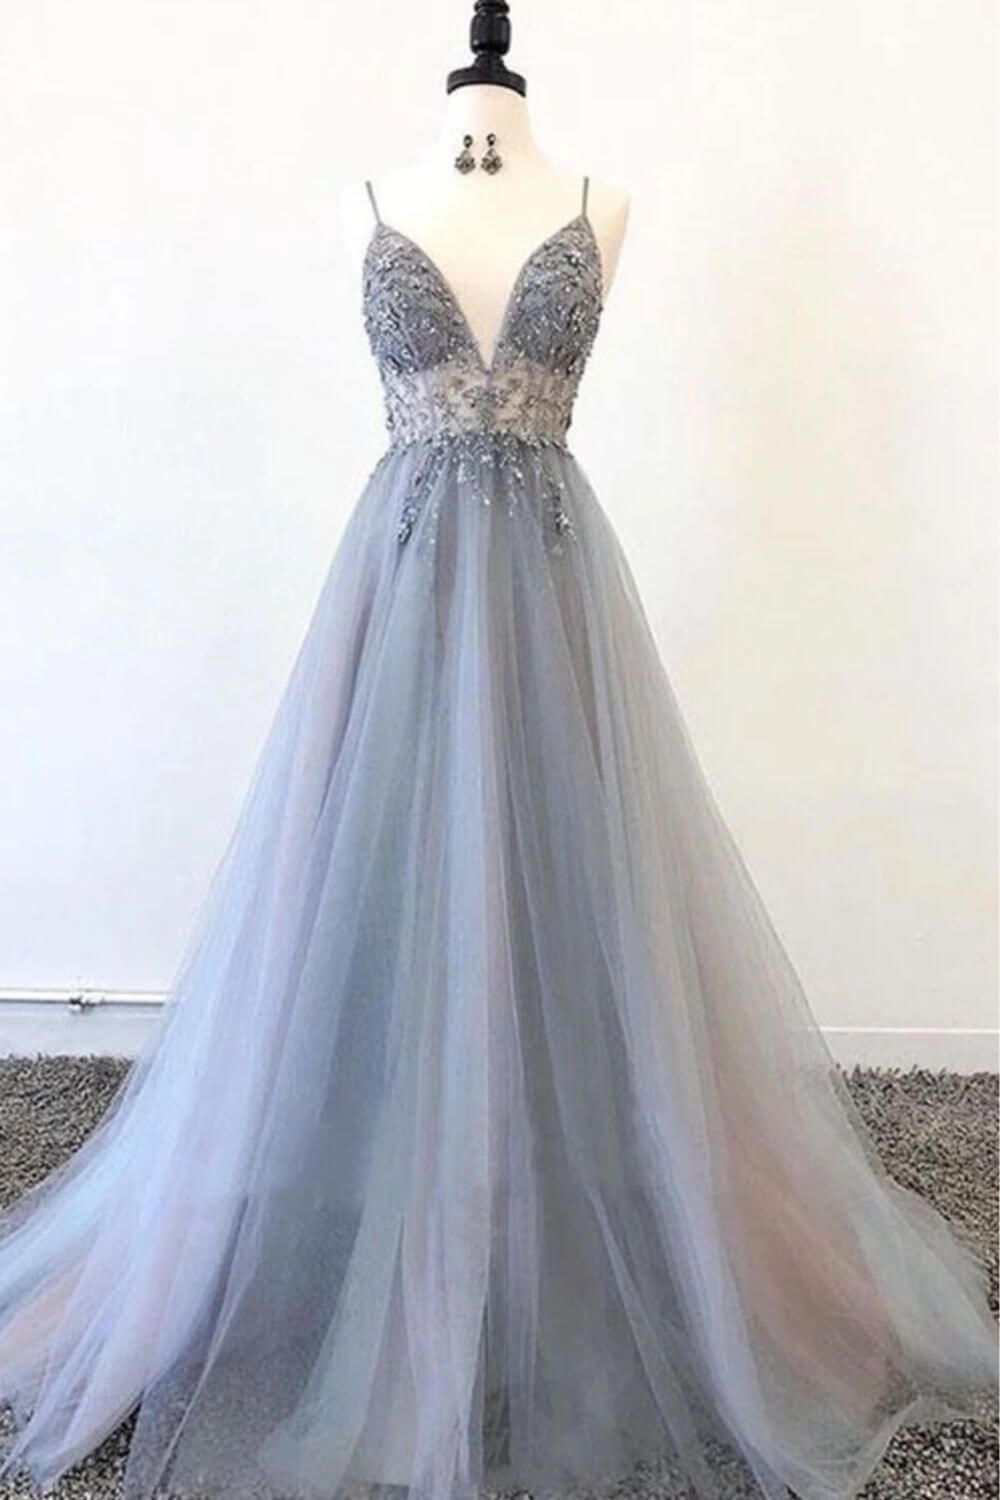 Hebochic Spaghetti Straps V Neck Tulle Prom Dress With Appliques A Line Long Formal Dress With Beads